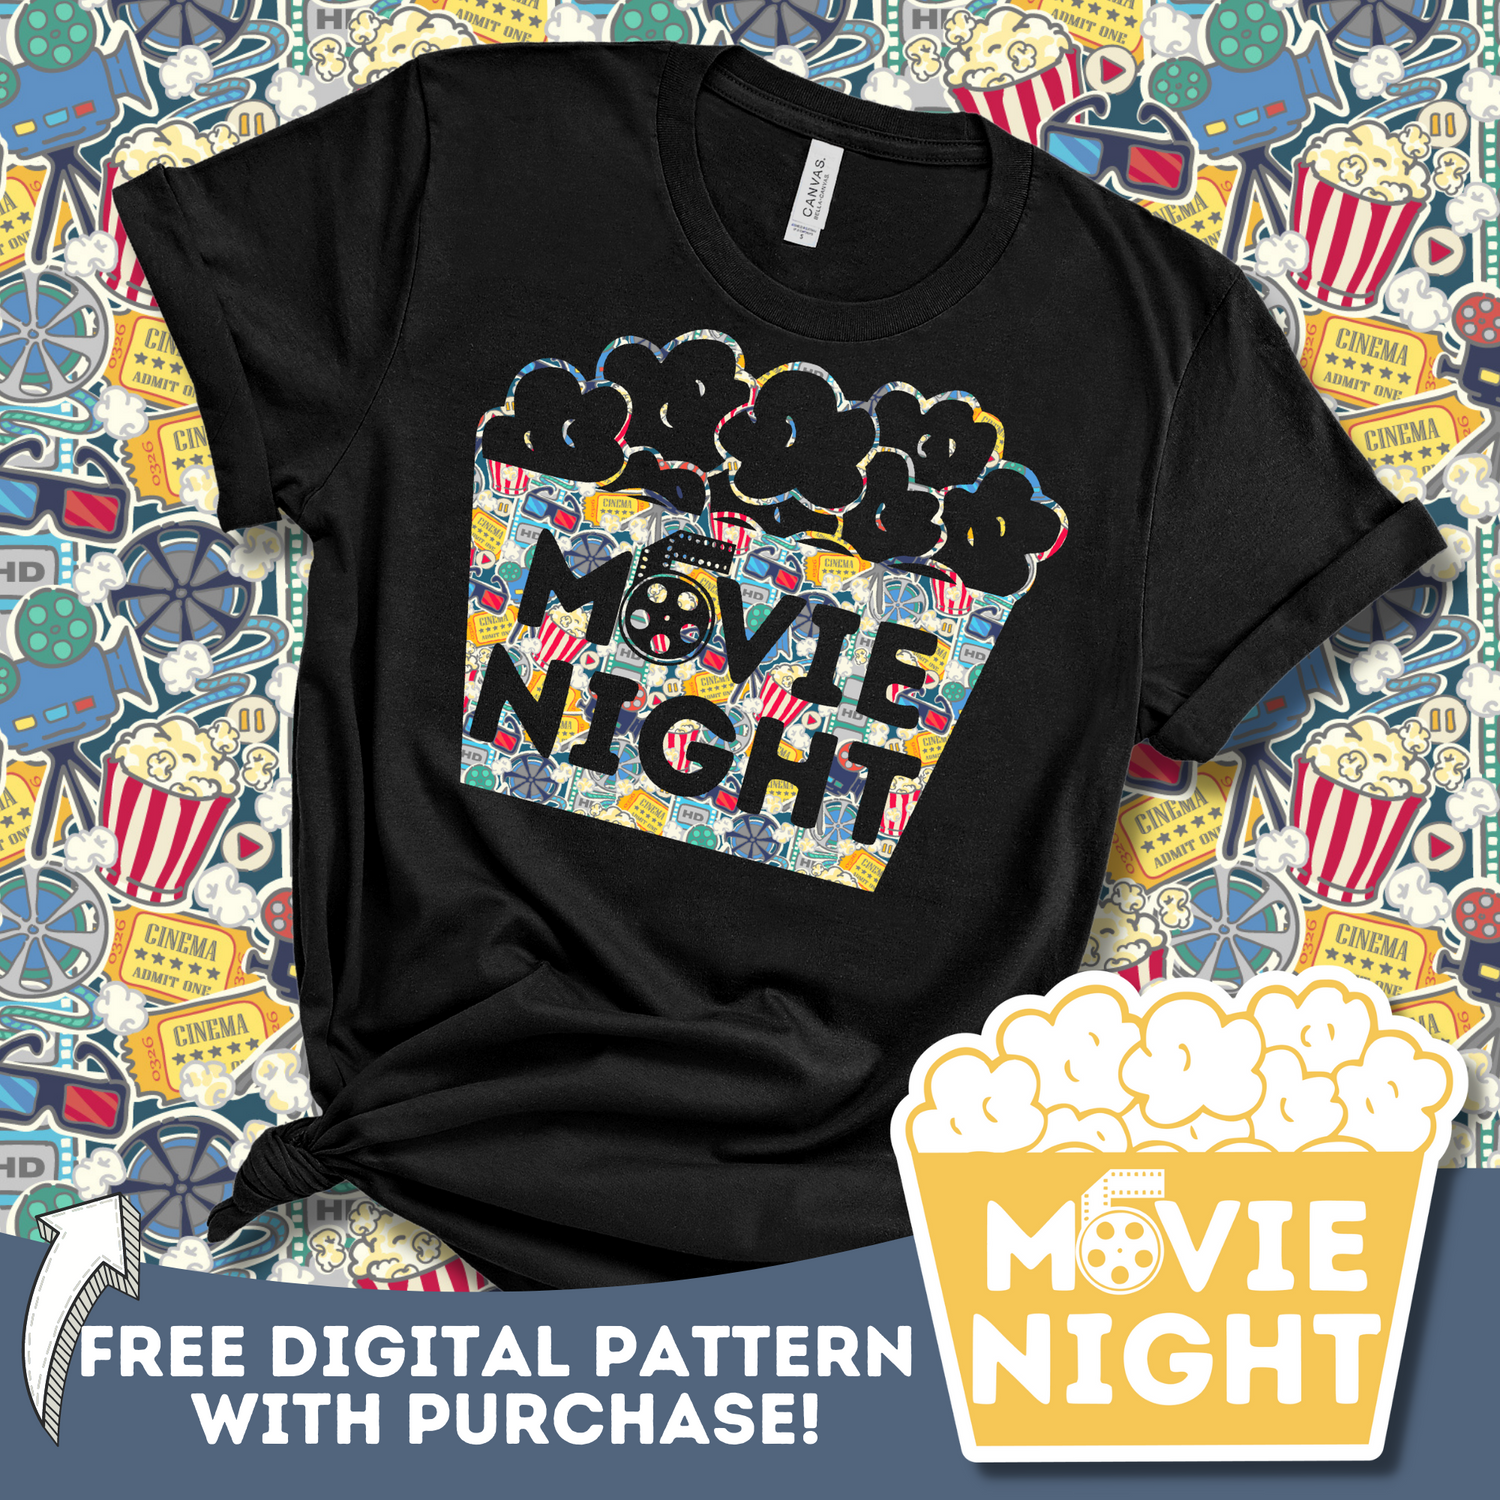 "Movie Night" Cut File with Free Pattern